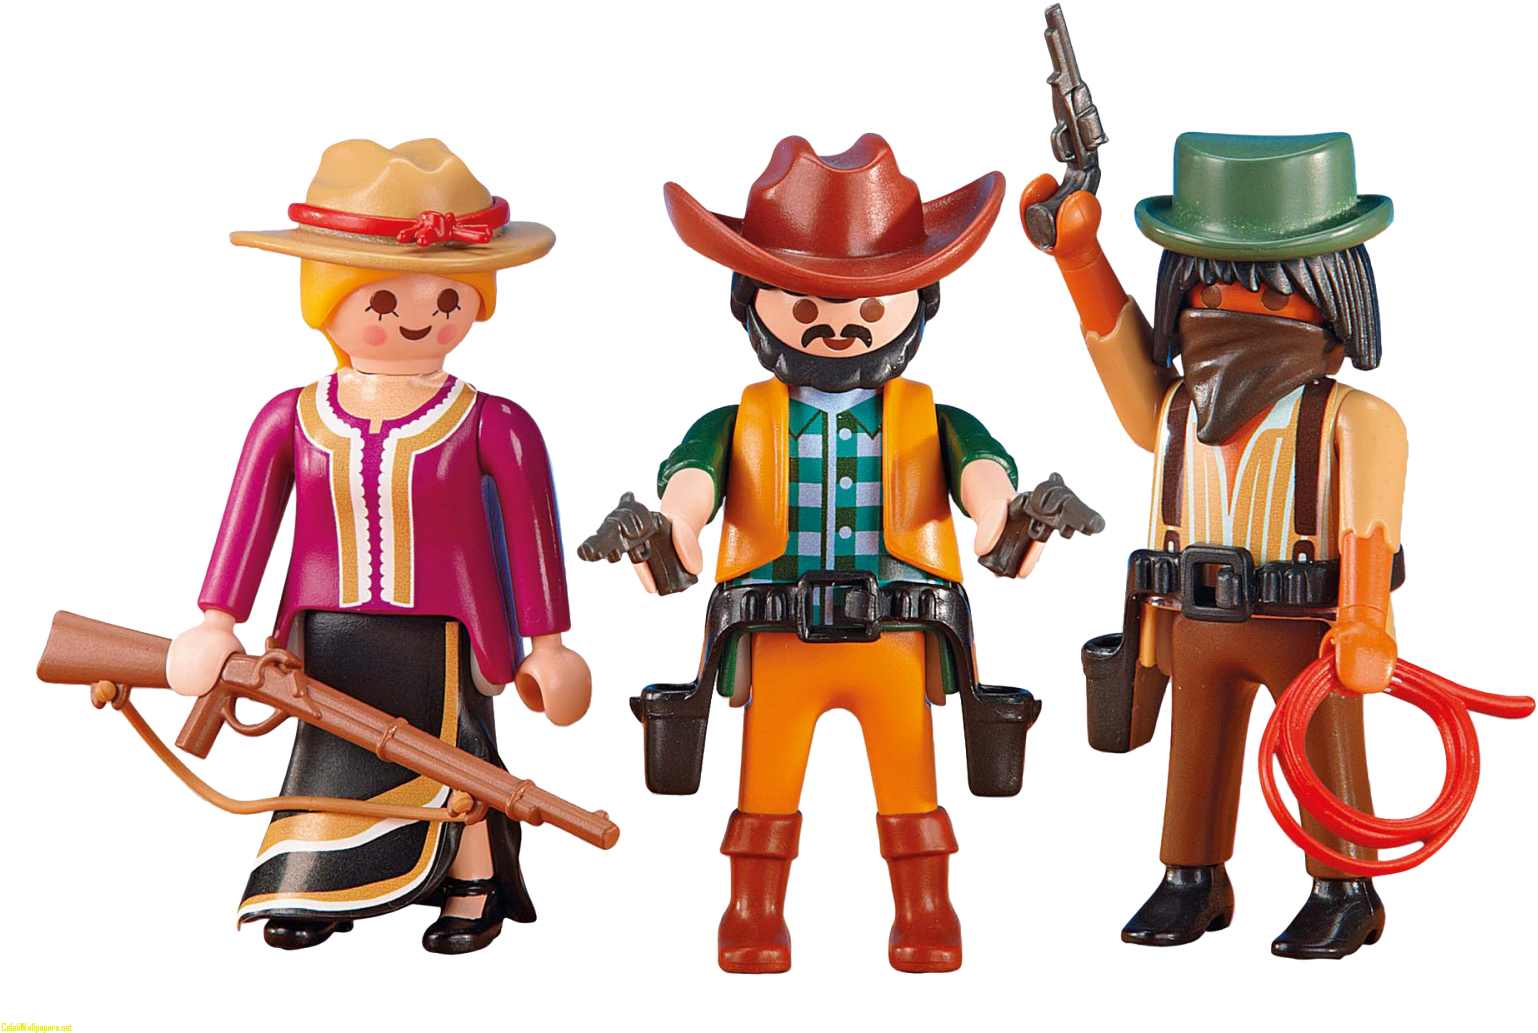 Cowboy Images Fresh 2 Cowboys And Cowgirl Playmobil - 2 Cowboys And Cowgirl (1600x1120)